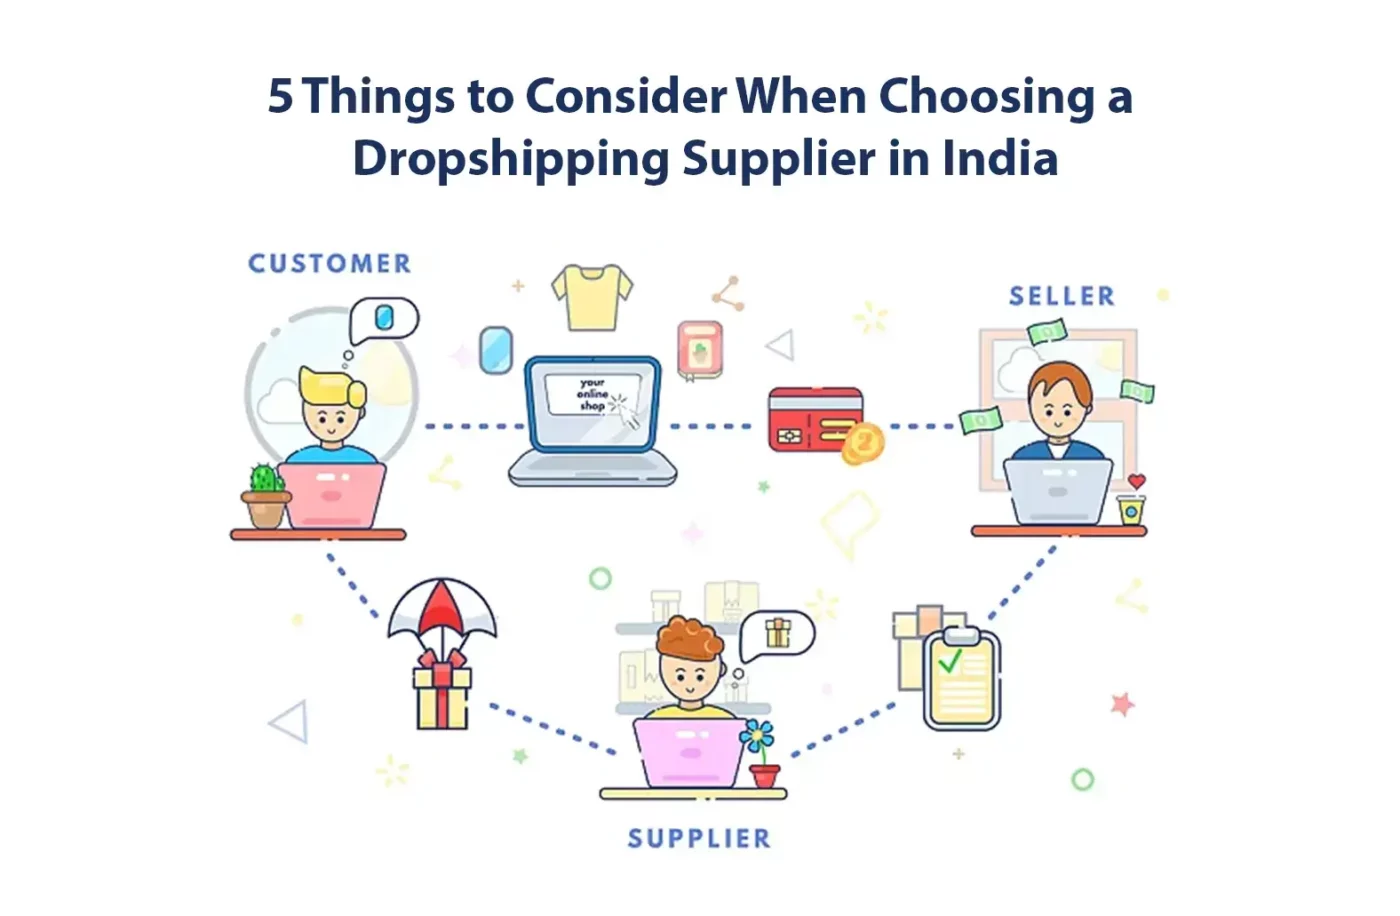 5 Things to Consider When Choosing a Dropshipping Supplier in India